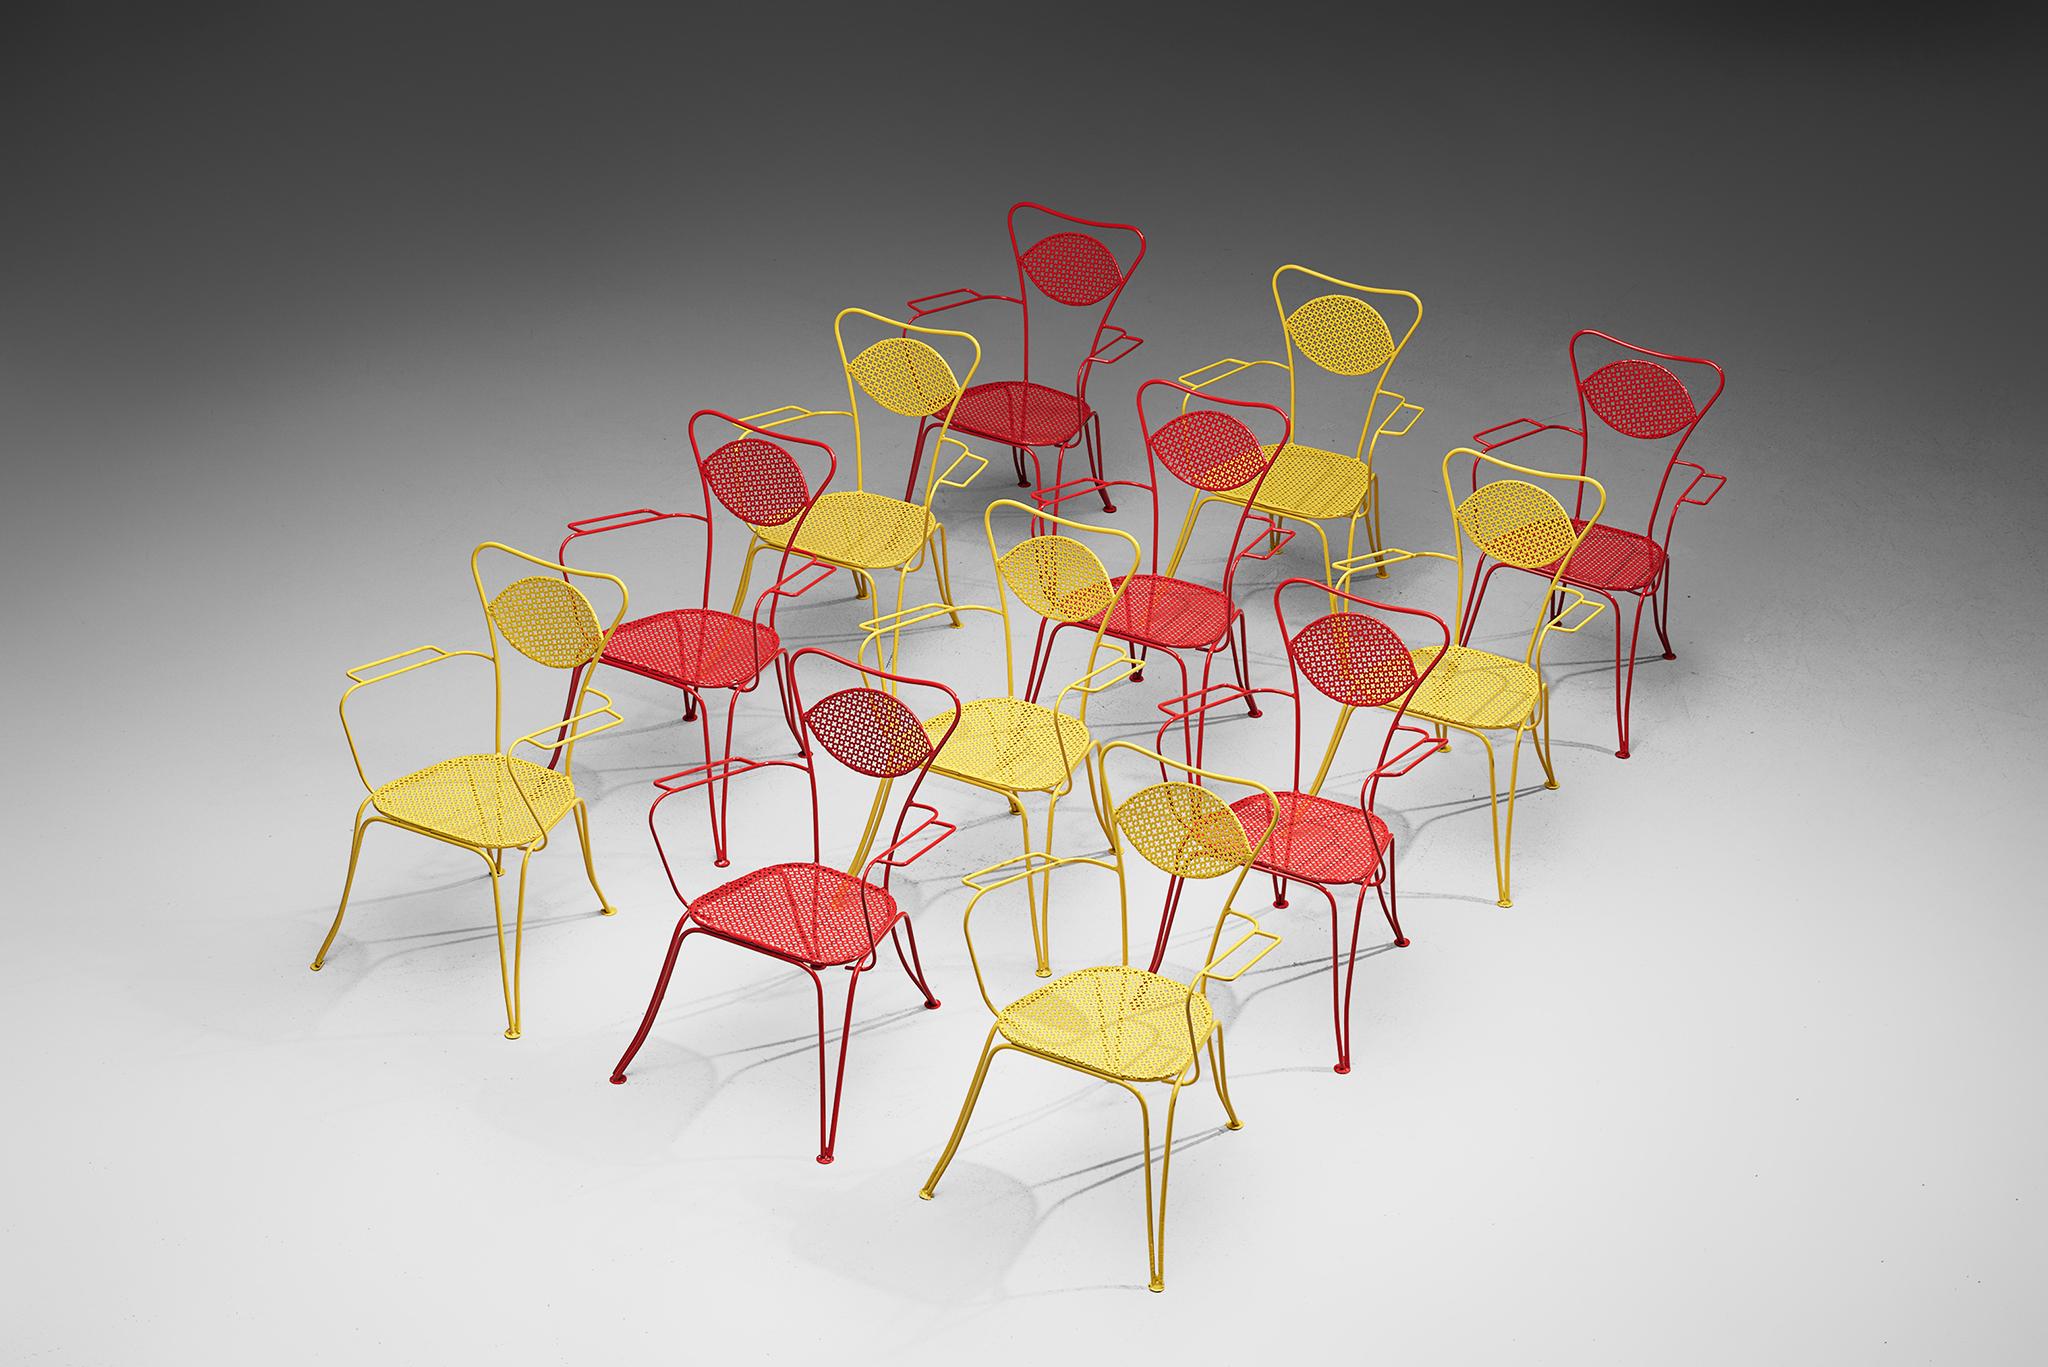 Large set of dining chairs, yellow colored metal, Italy, 1960s.

Very large set of metal chairs in a vibrant colors. The chairs have an elegant, bold design, as is quintessential of Italian patio chairs. Curved shapes and thin armrests form the